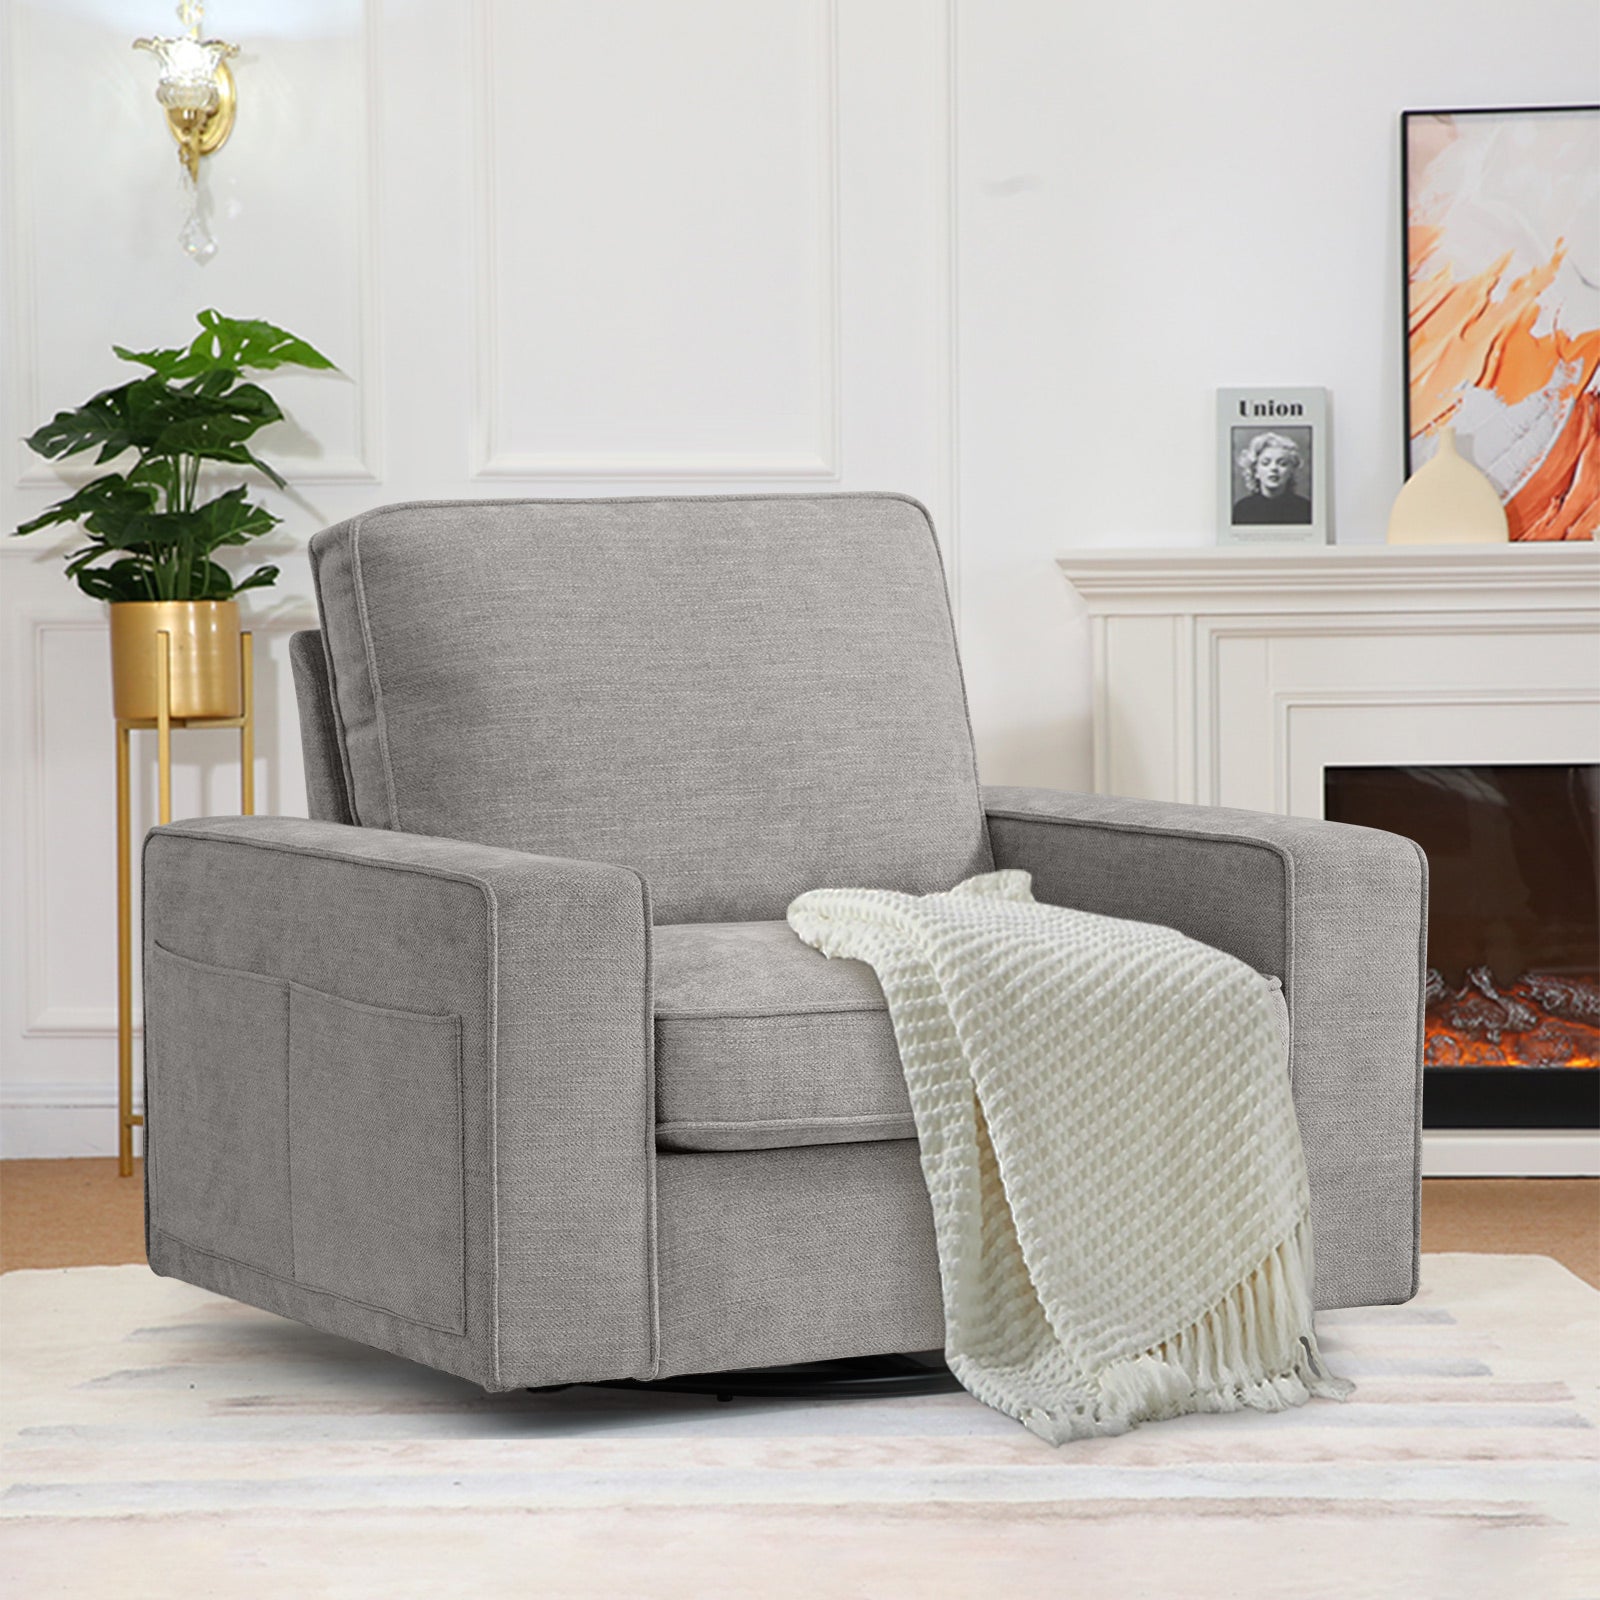 360 Degree Swivel Accent Chair Armchair For Living Room